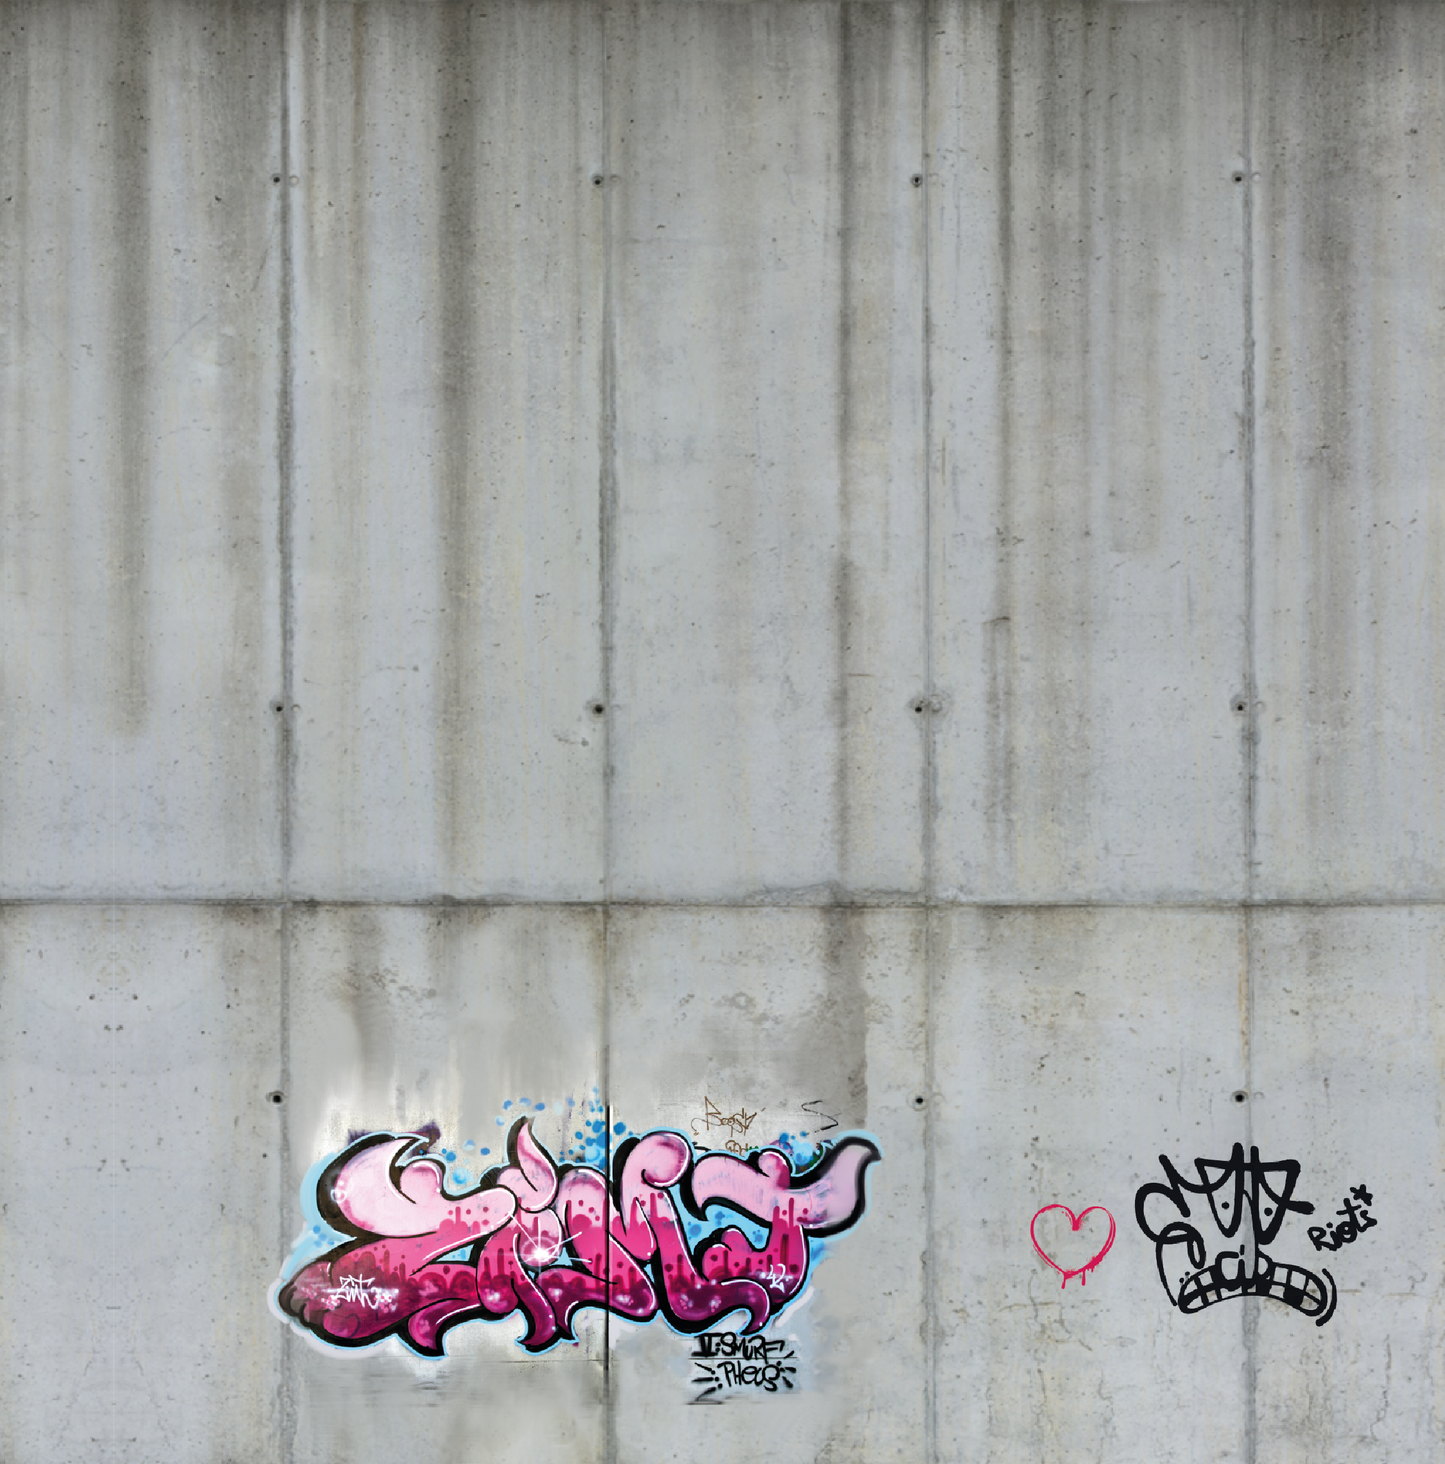 Modeltex : Retaining Wall Concrete 02 Wheatered with graffiti